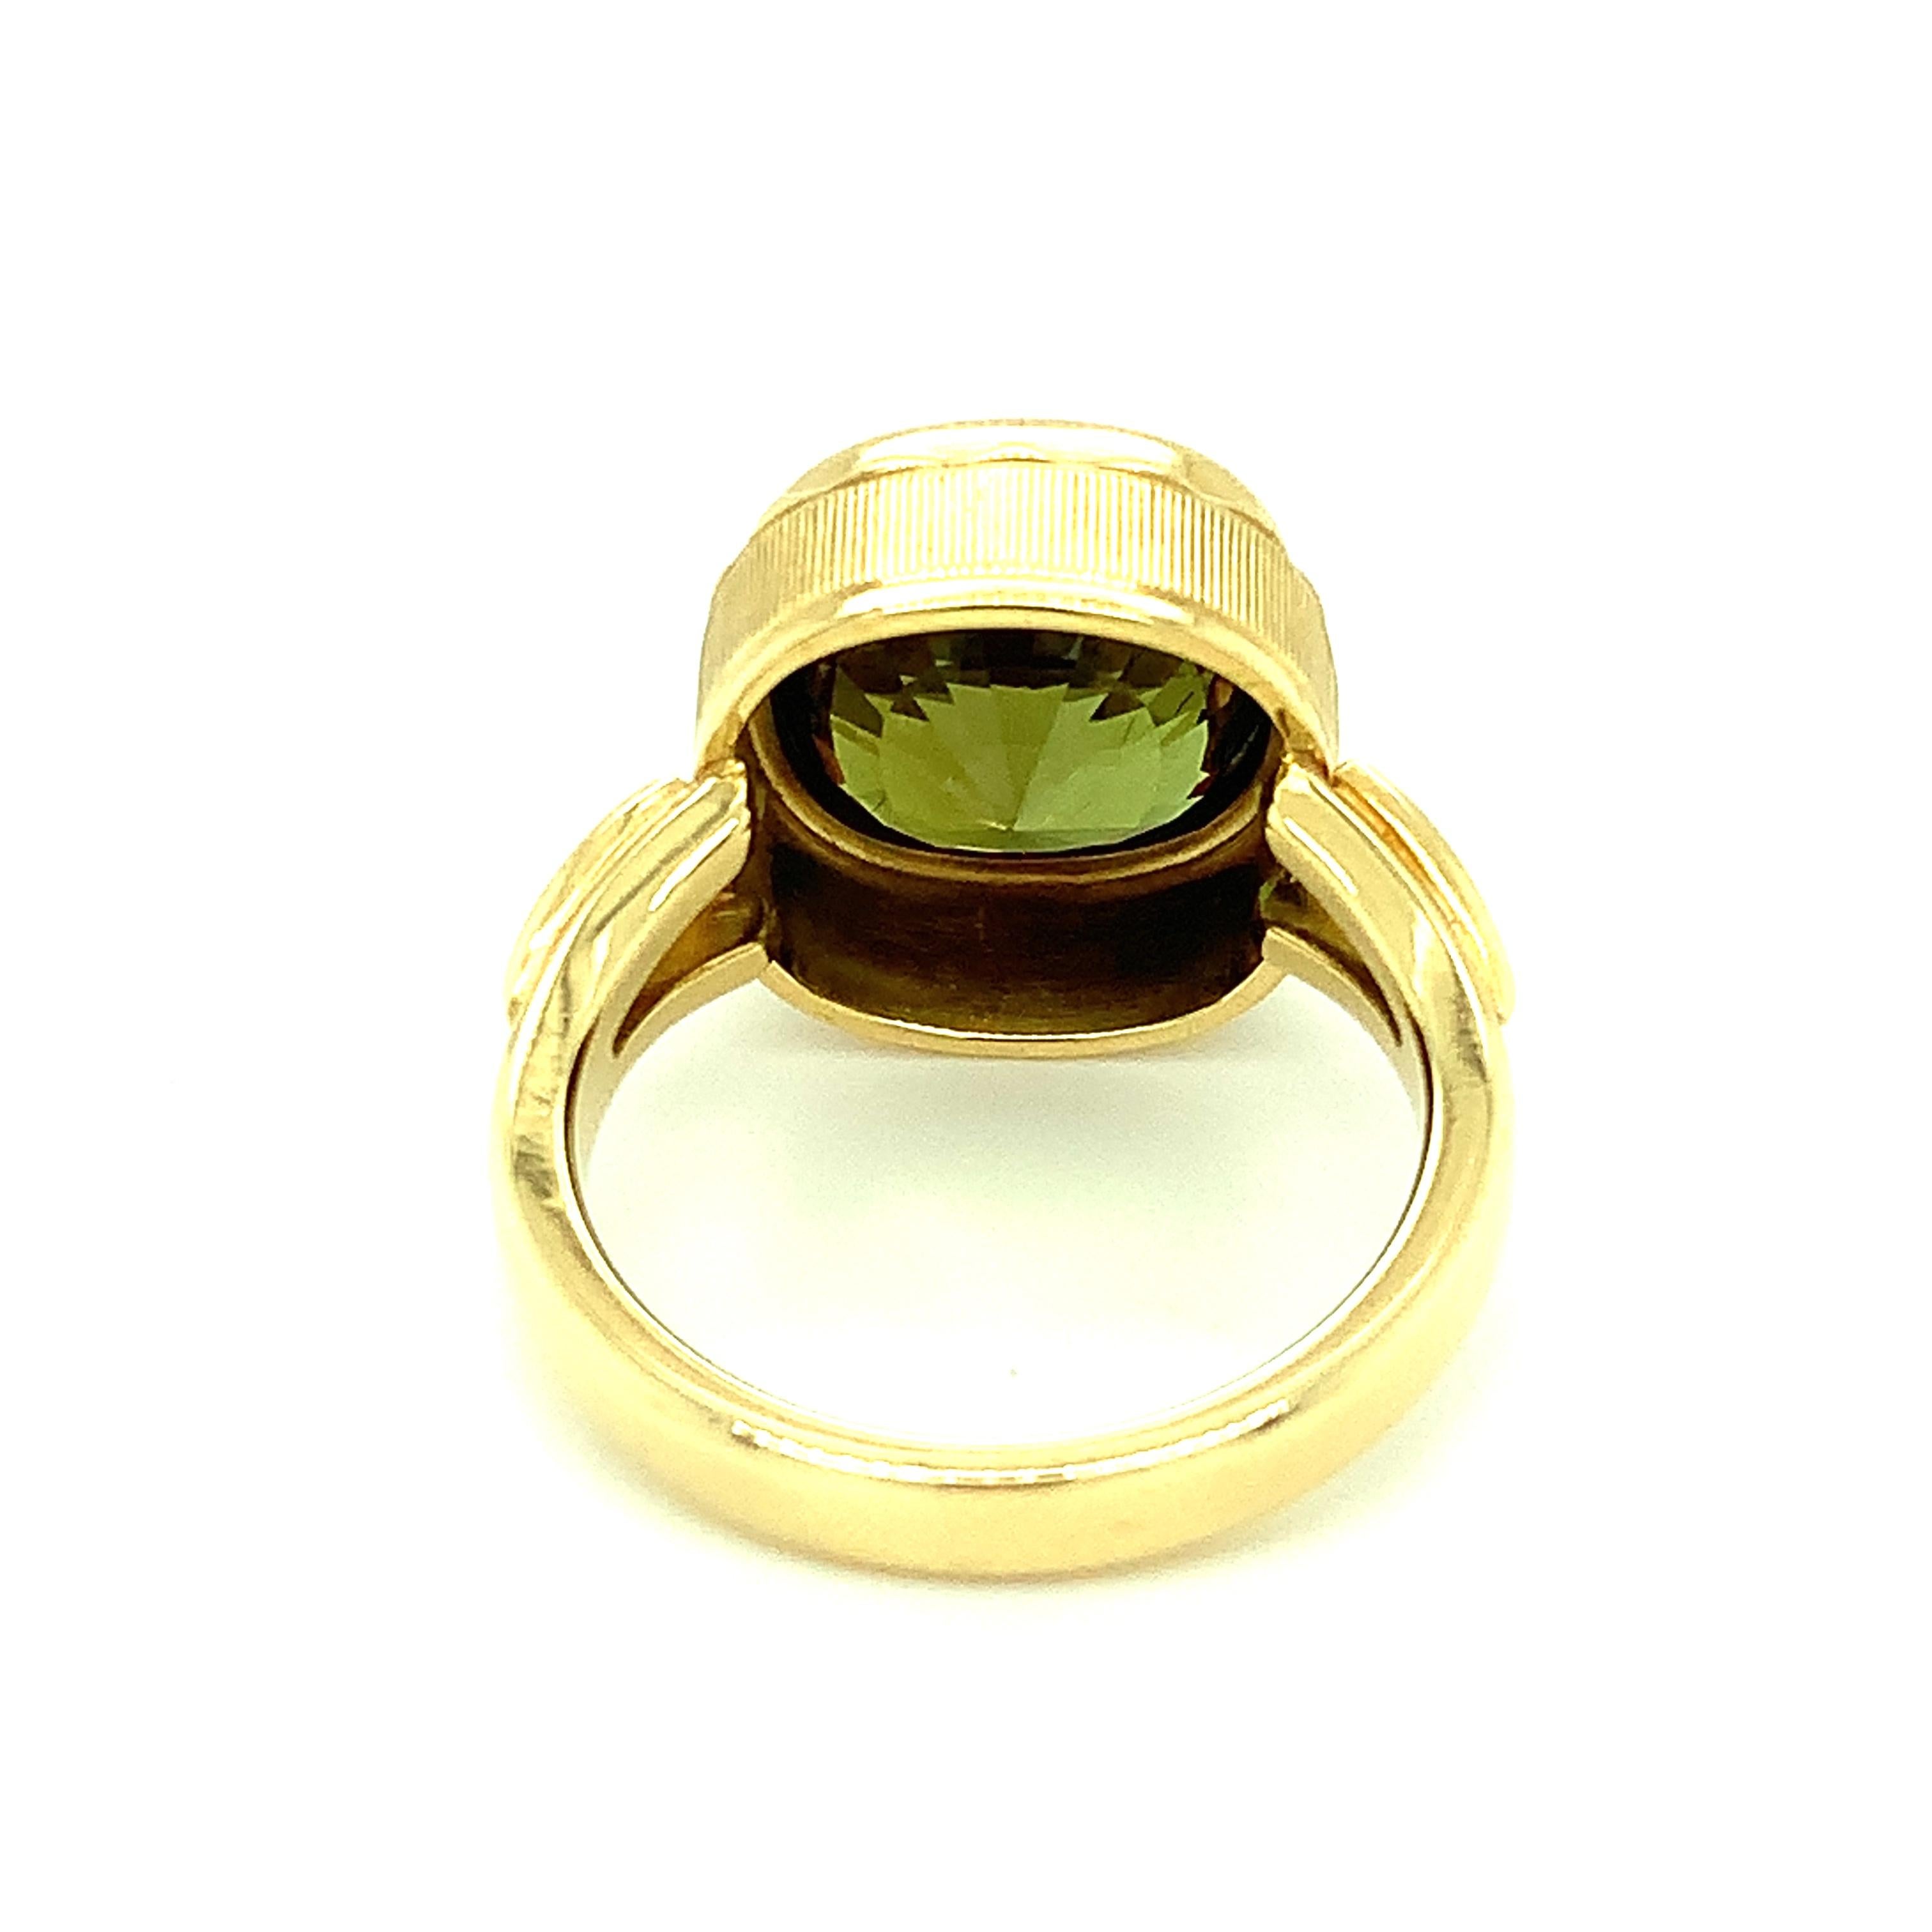 8.16 Carat Chrysoberyl and Diamond Ring, Hand-Engraved 18k Yellow Gold  For Sale 1